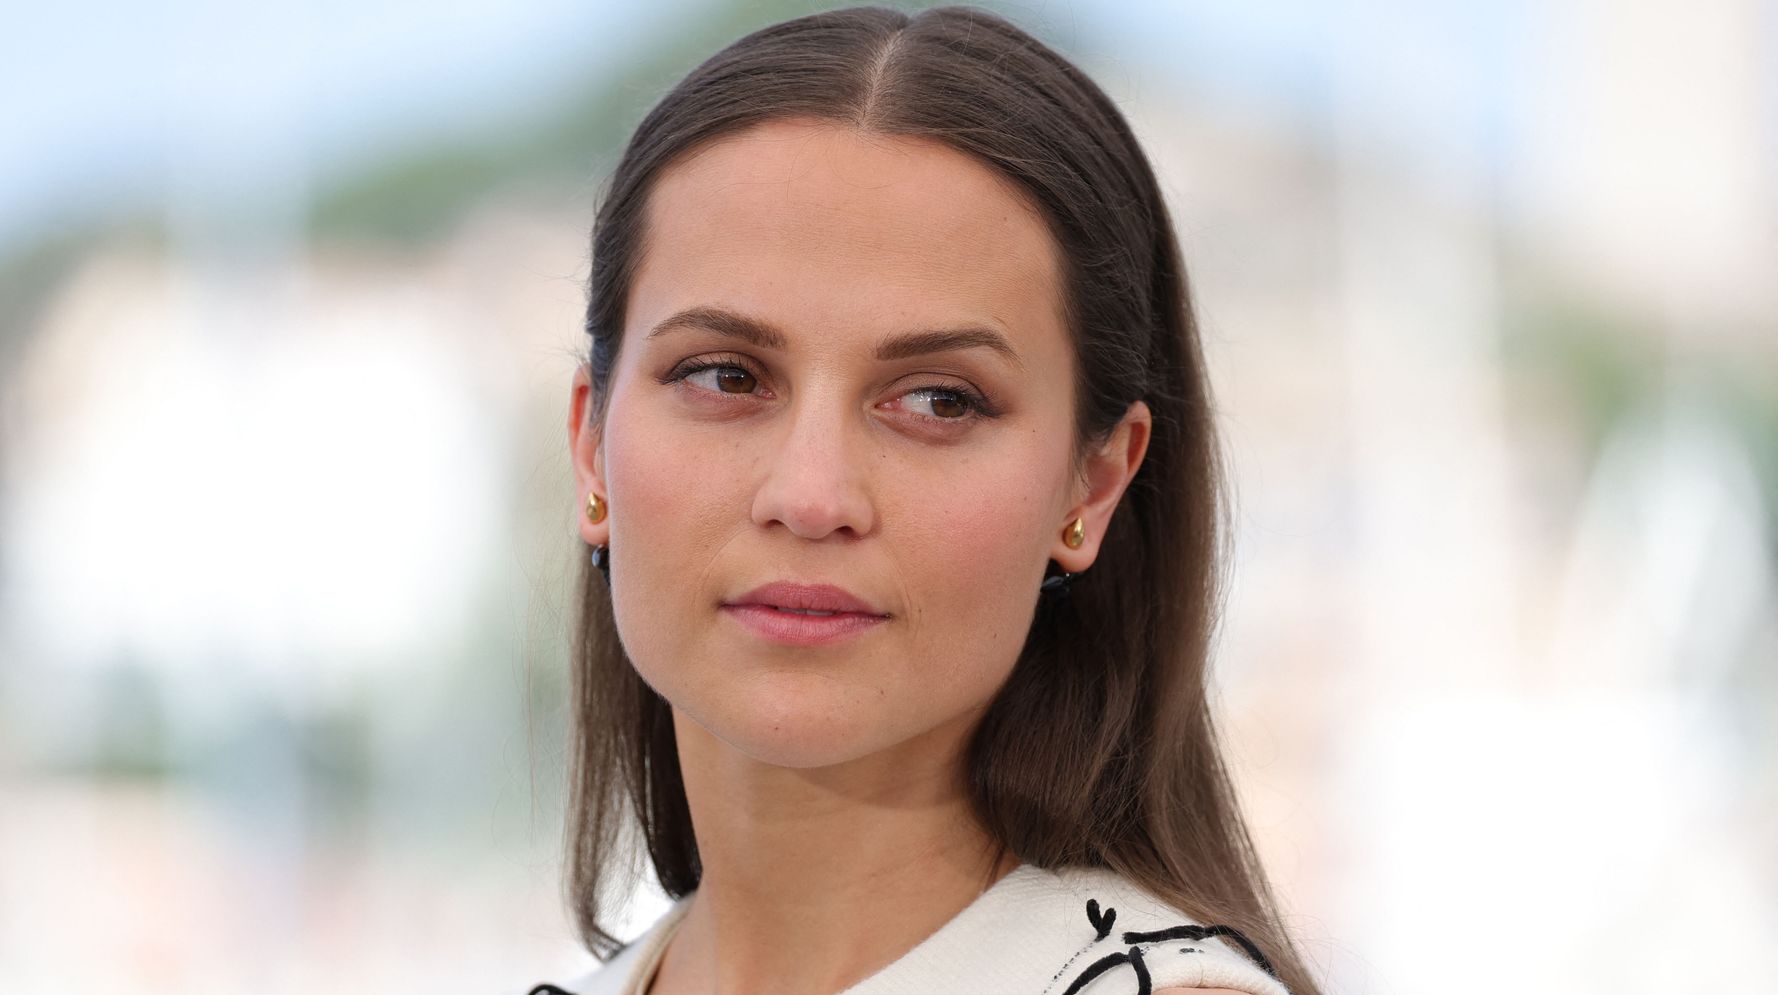 Alicia Vikander Recalls 'Painful' Miscarriage And Portraying Infertility Struggles On Screen